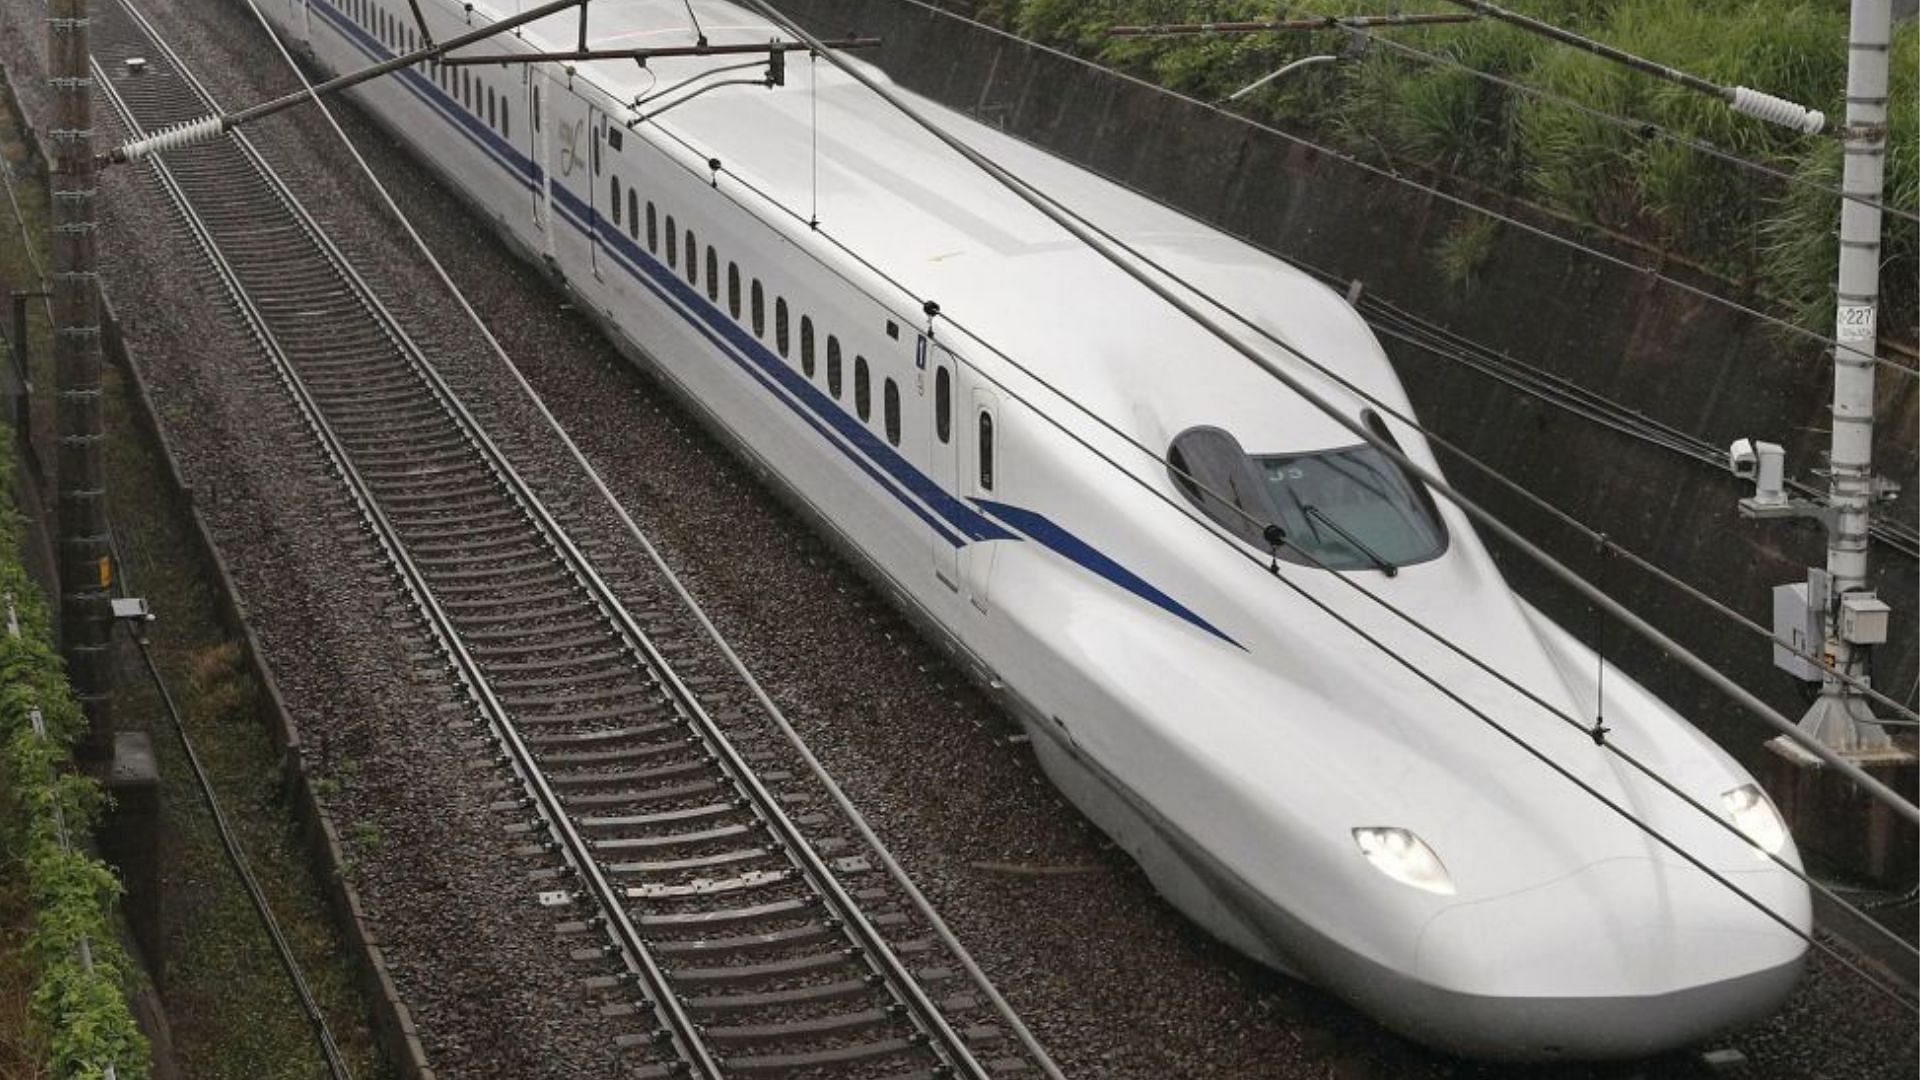 Which wrestling veteran will be wrestling on a bullet train?